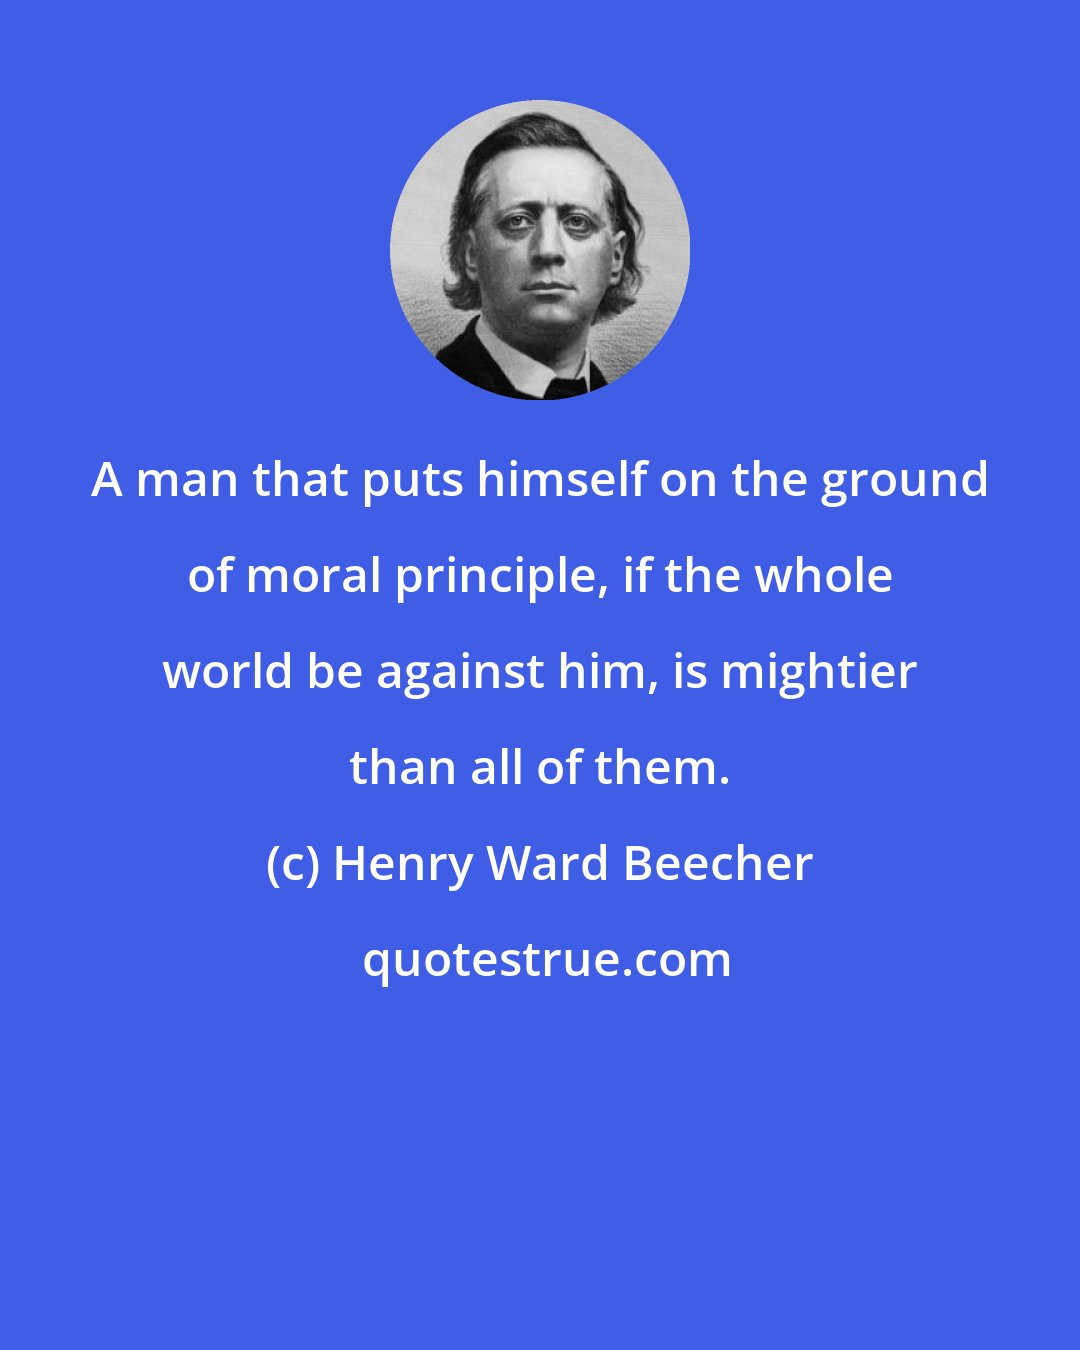 Henry Ward Beecher: A man that puts himself on the ground of moral principle, if the whole world be against him, is mightier than all of them.